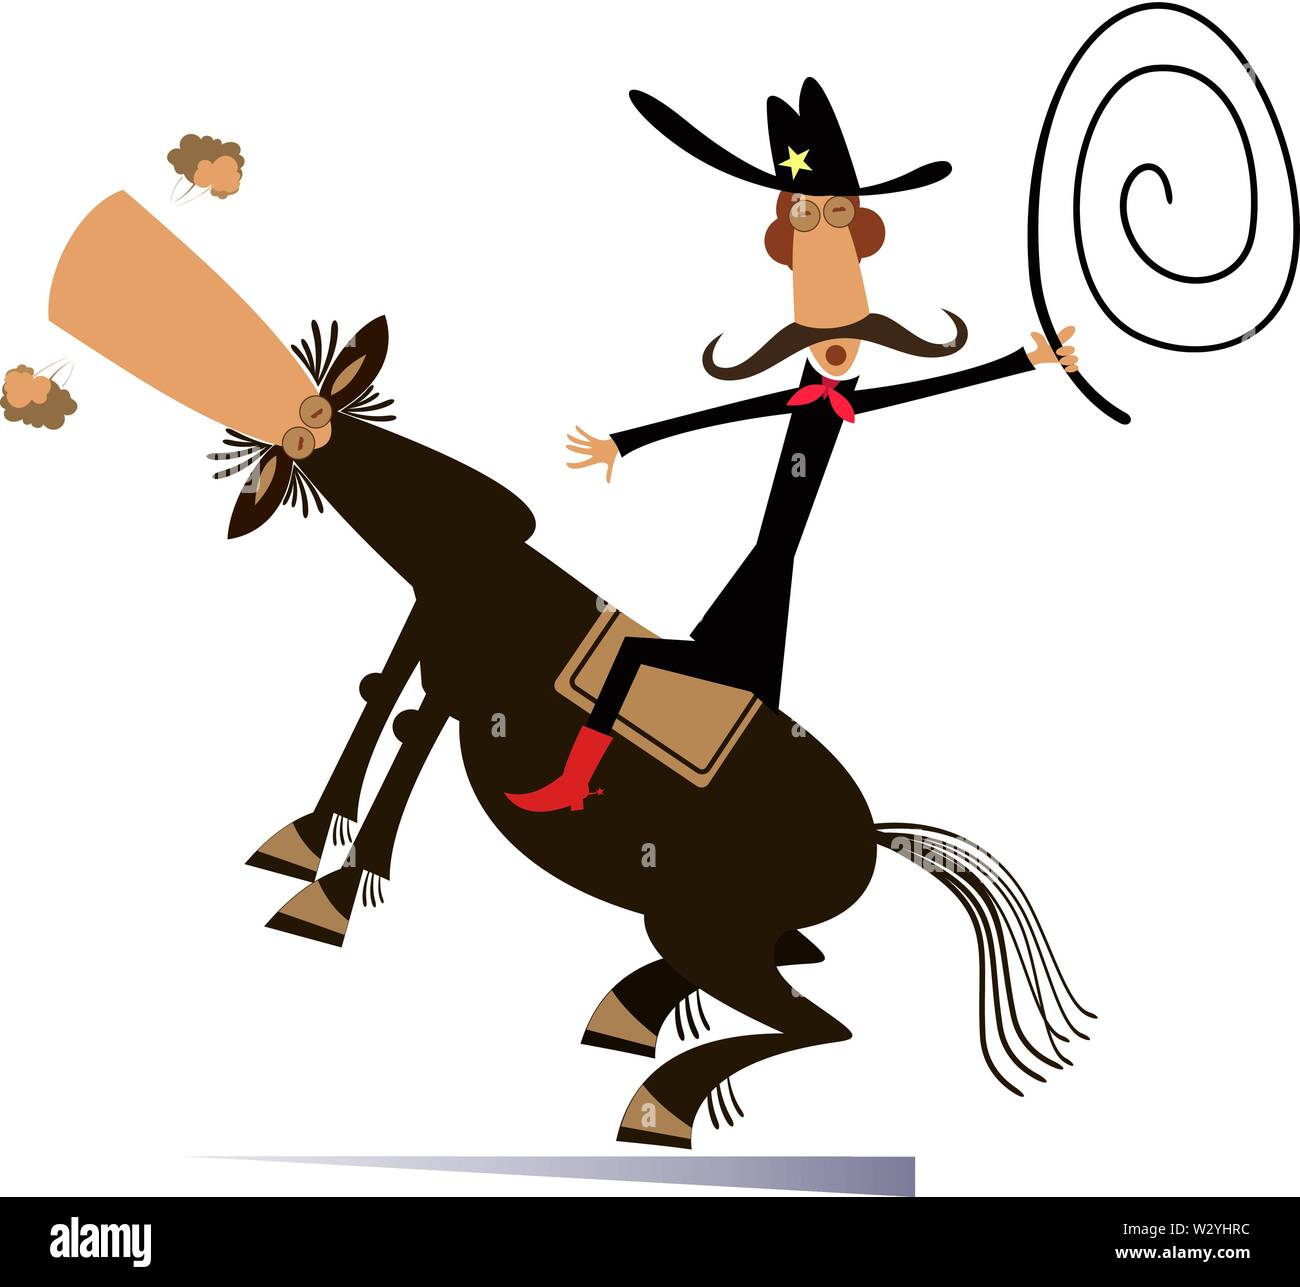 Cartoon rodeo illustration with cowboy holding a lasso and horse isolated on white Stock Vector